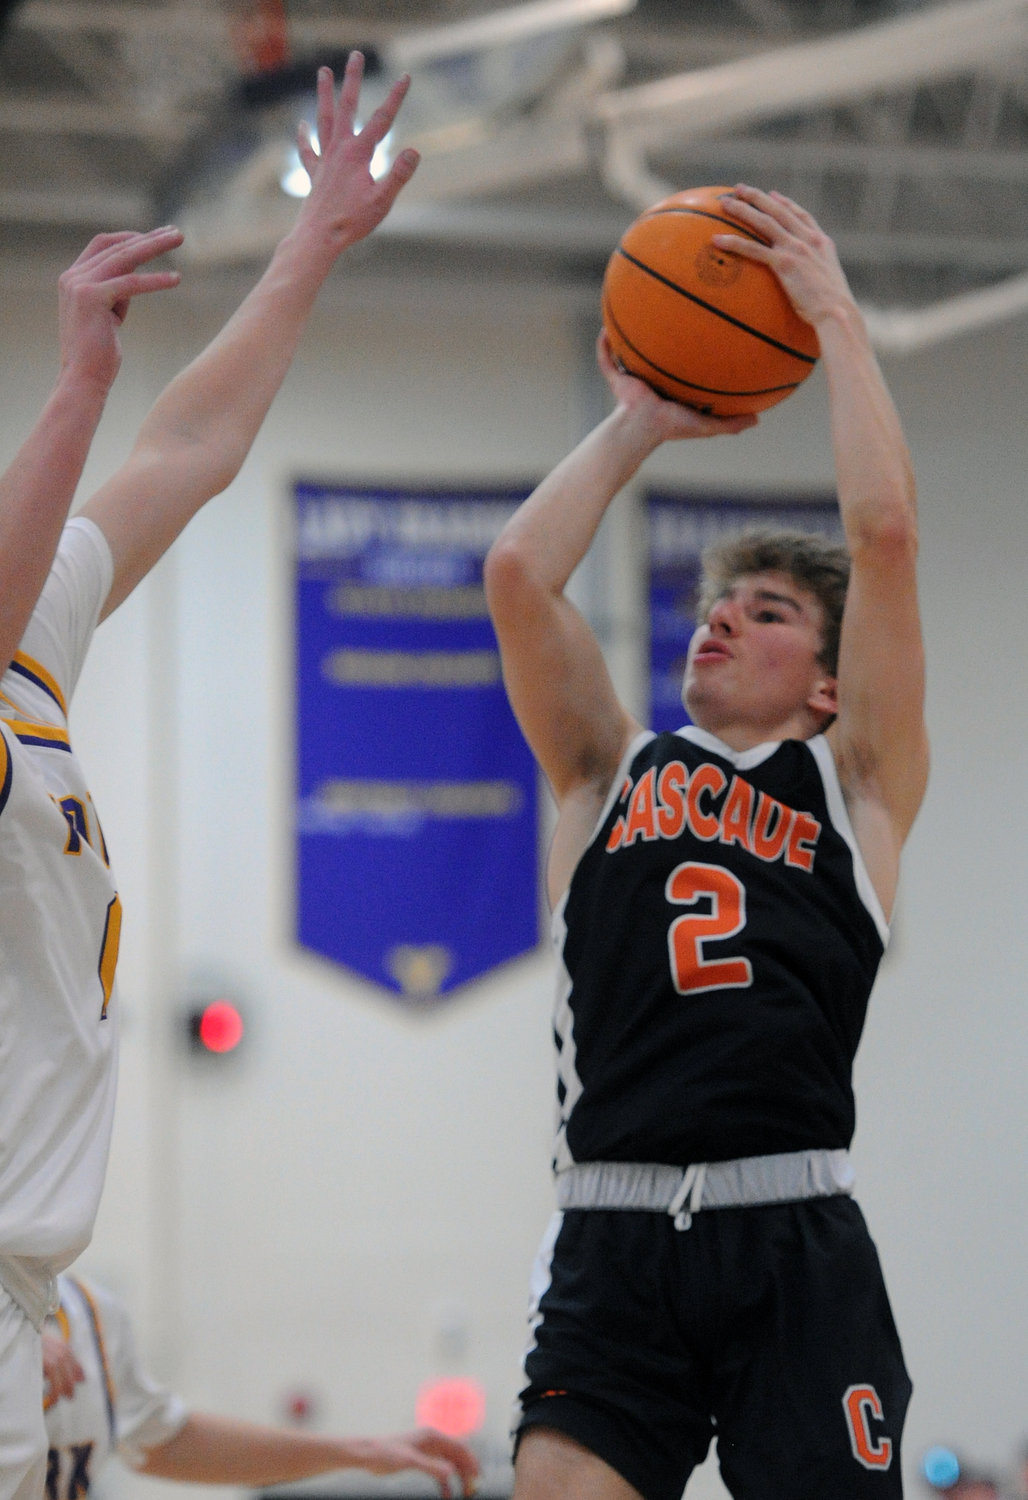 Senior Jayden Gulick pulls up for a contested jumper during Monday night’s sectional.